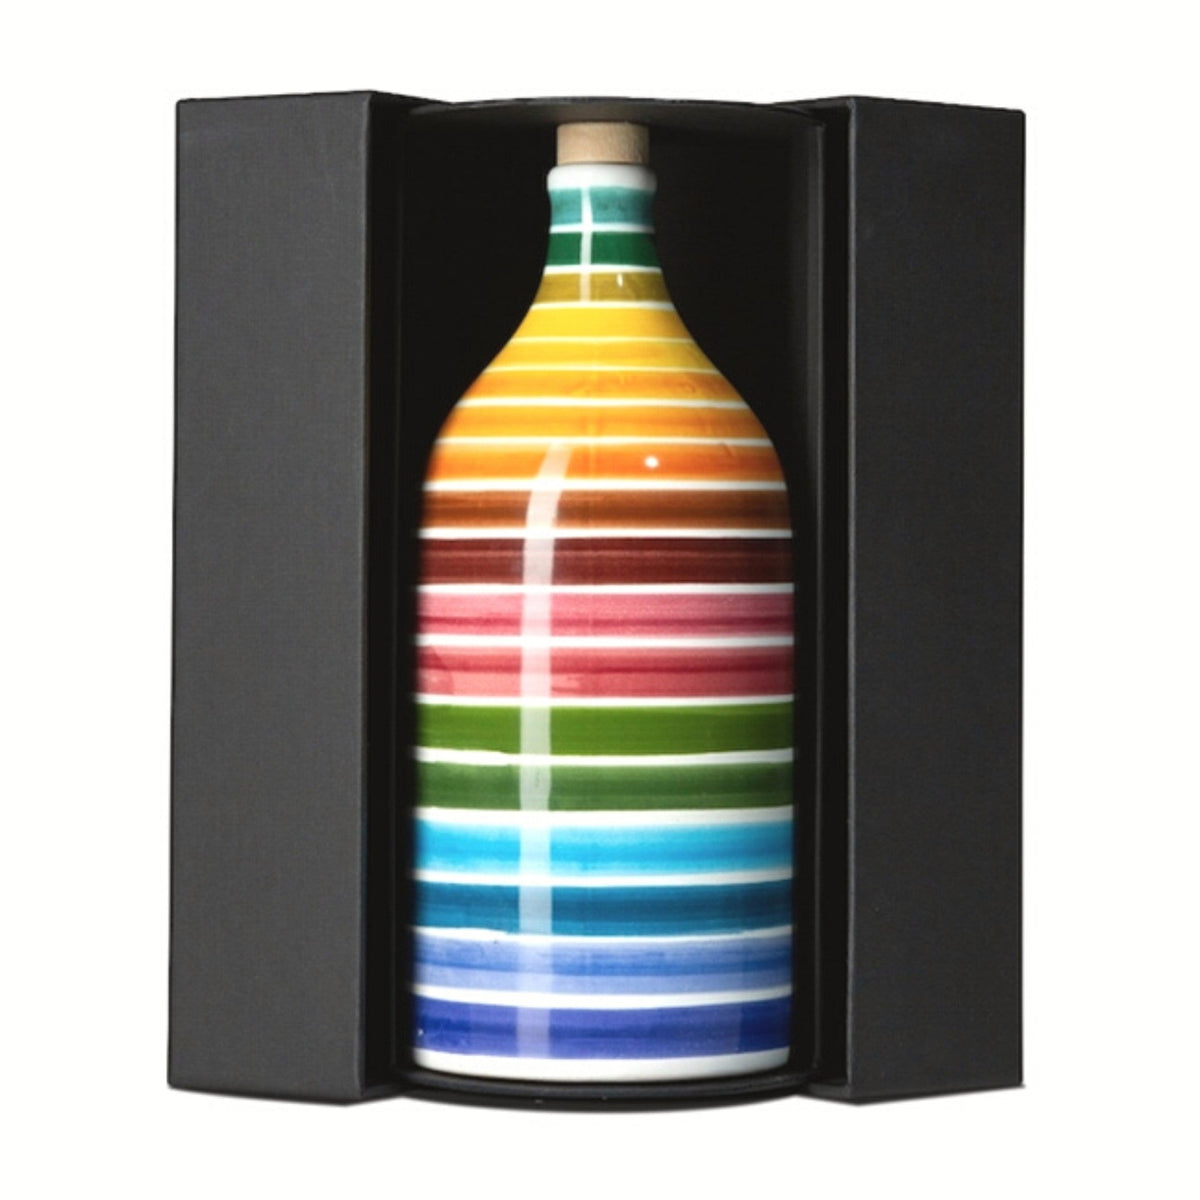 Frantoio Muraglia Magnum Rainbow Collection Intense Fruity Coratina Extra Virgin Olive Oil 1500ml  | Imported and distributed in the UK by Just Gourmet Foods